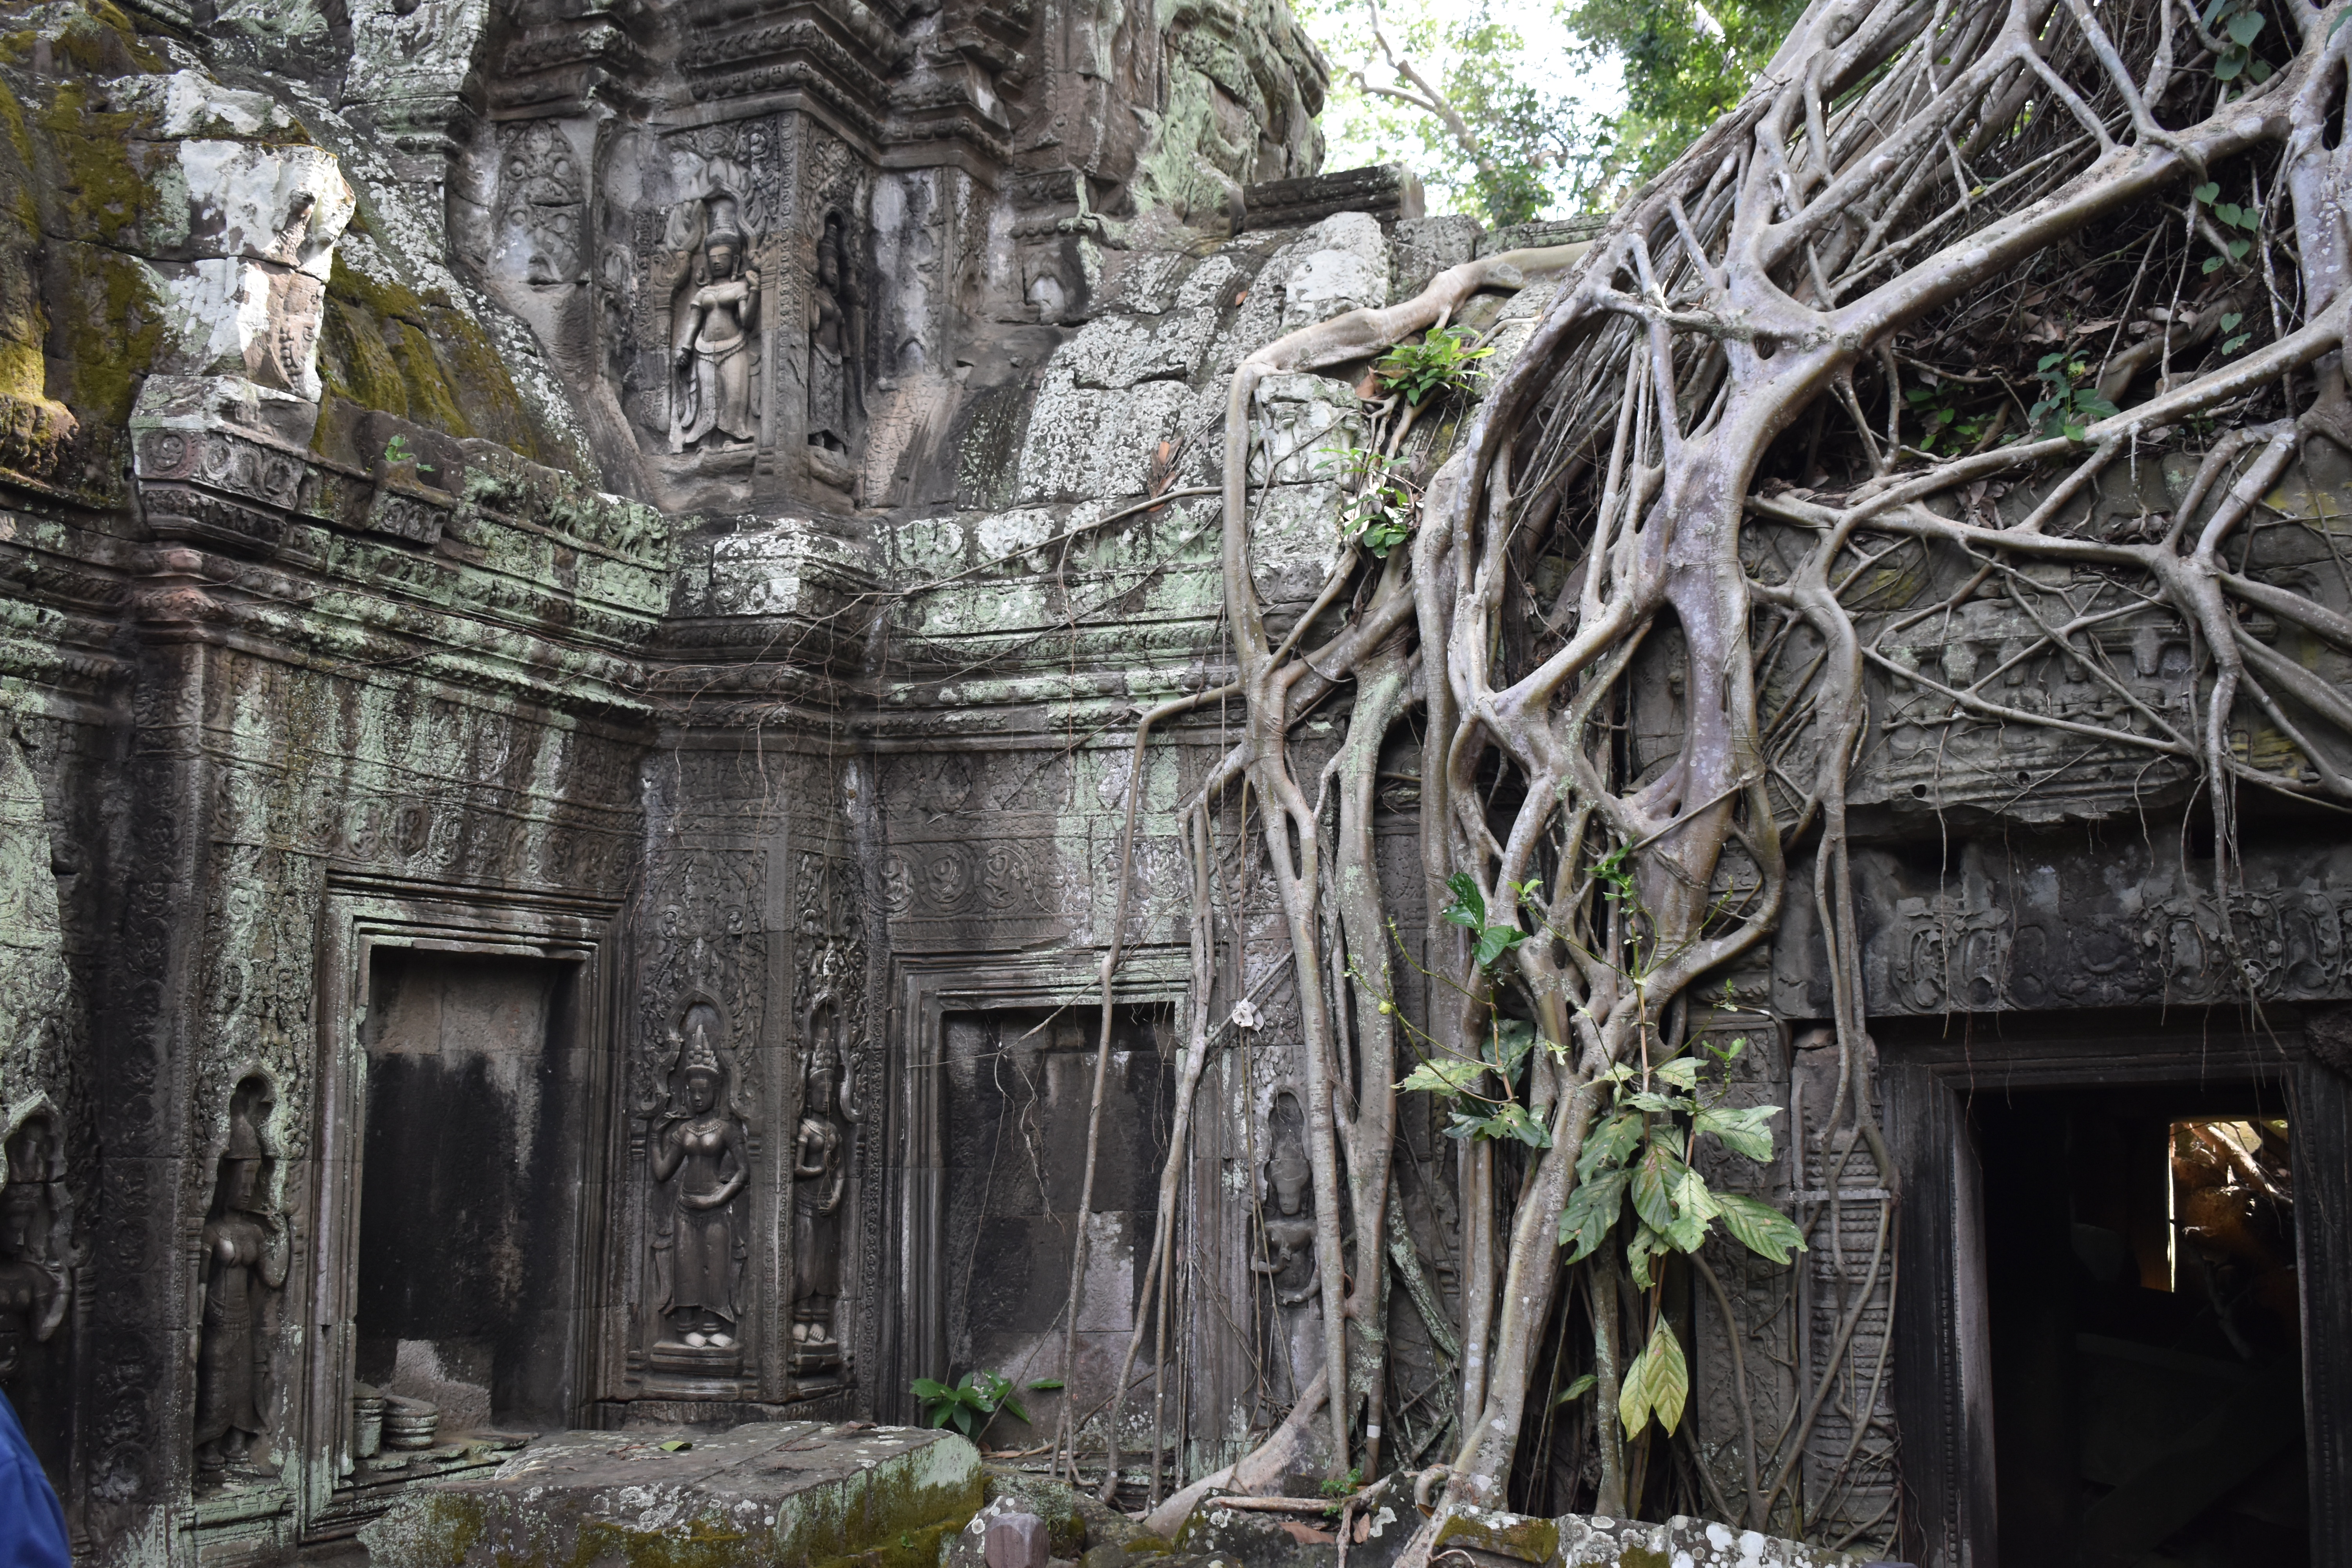 trees grow out of the temples at ta prohm, cambodia